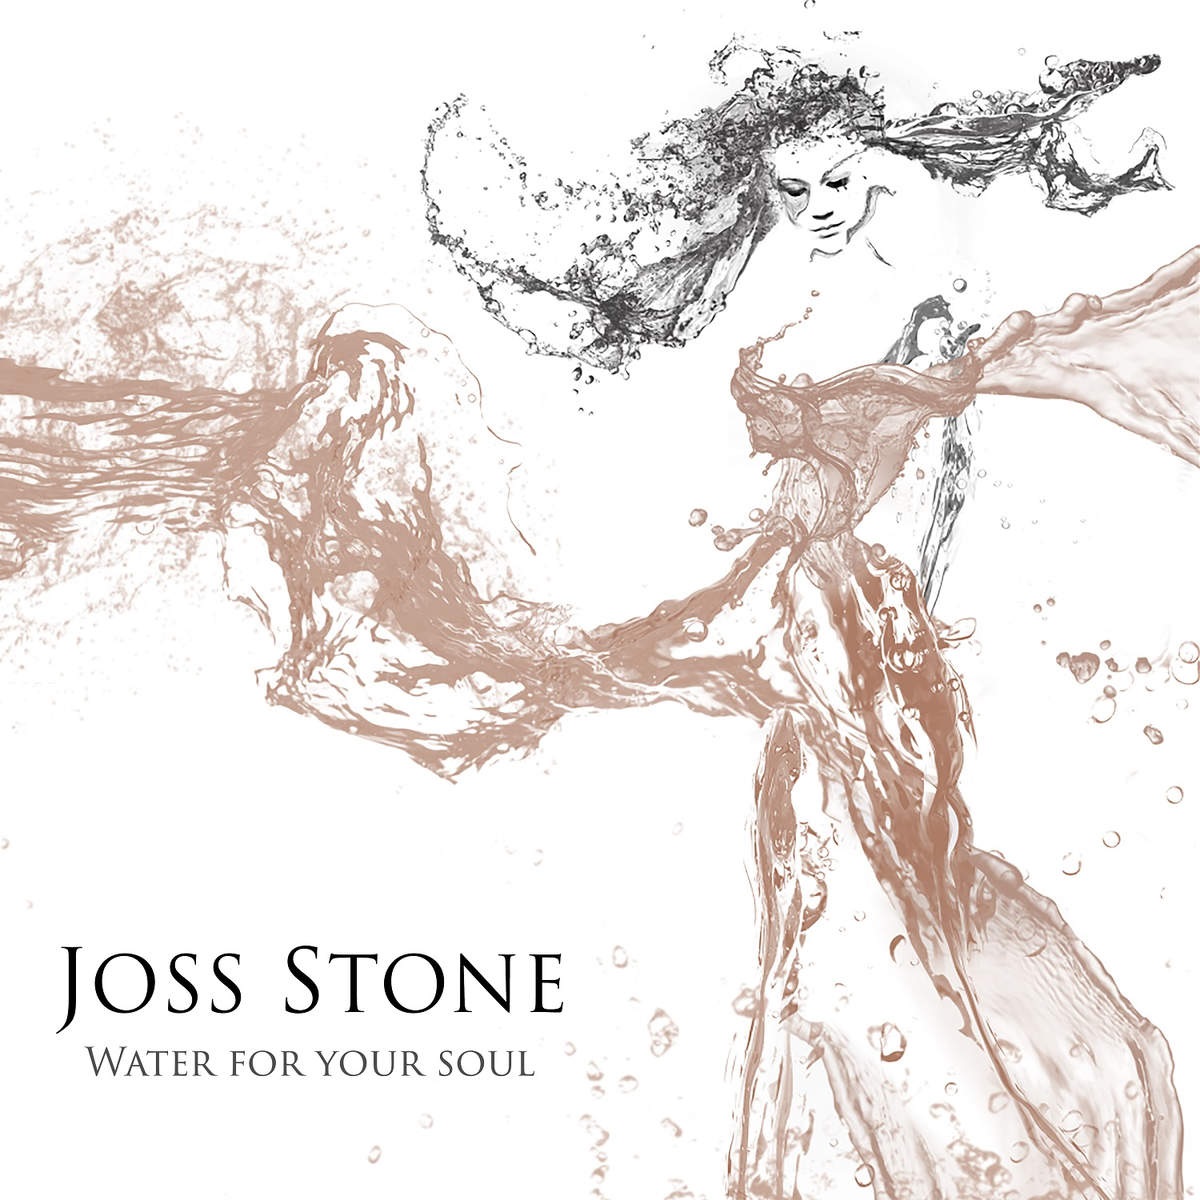 Joss Stone Water For Your Soul.jpg